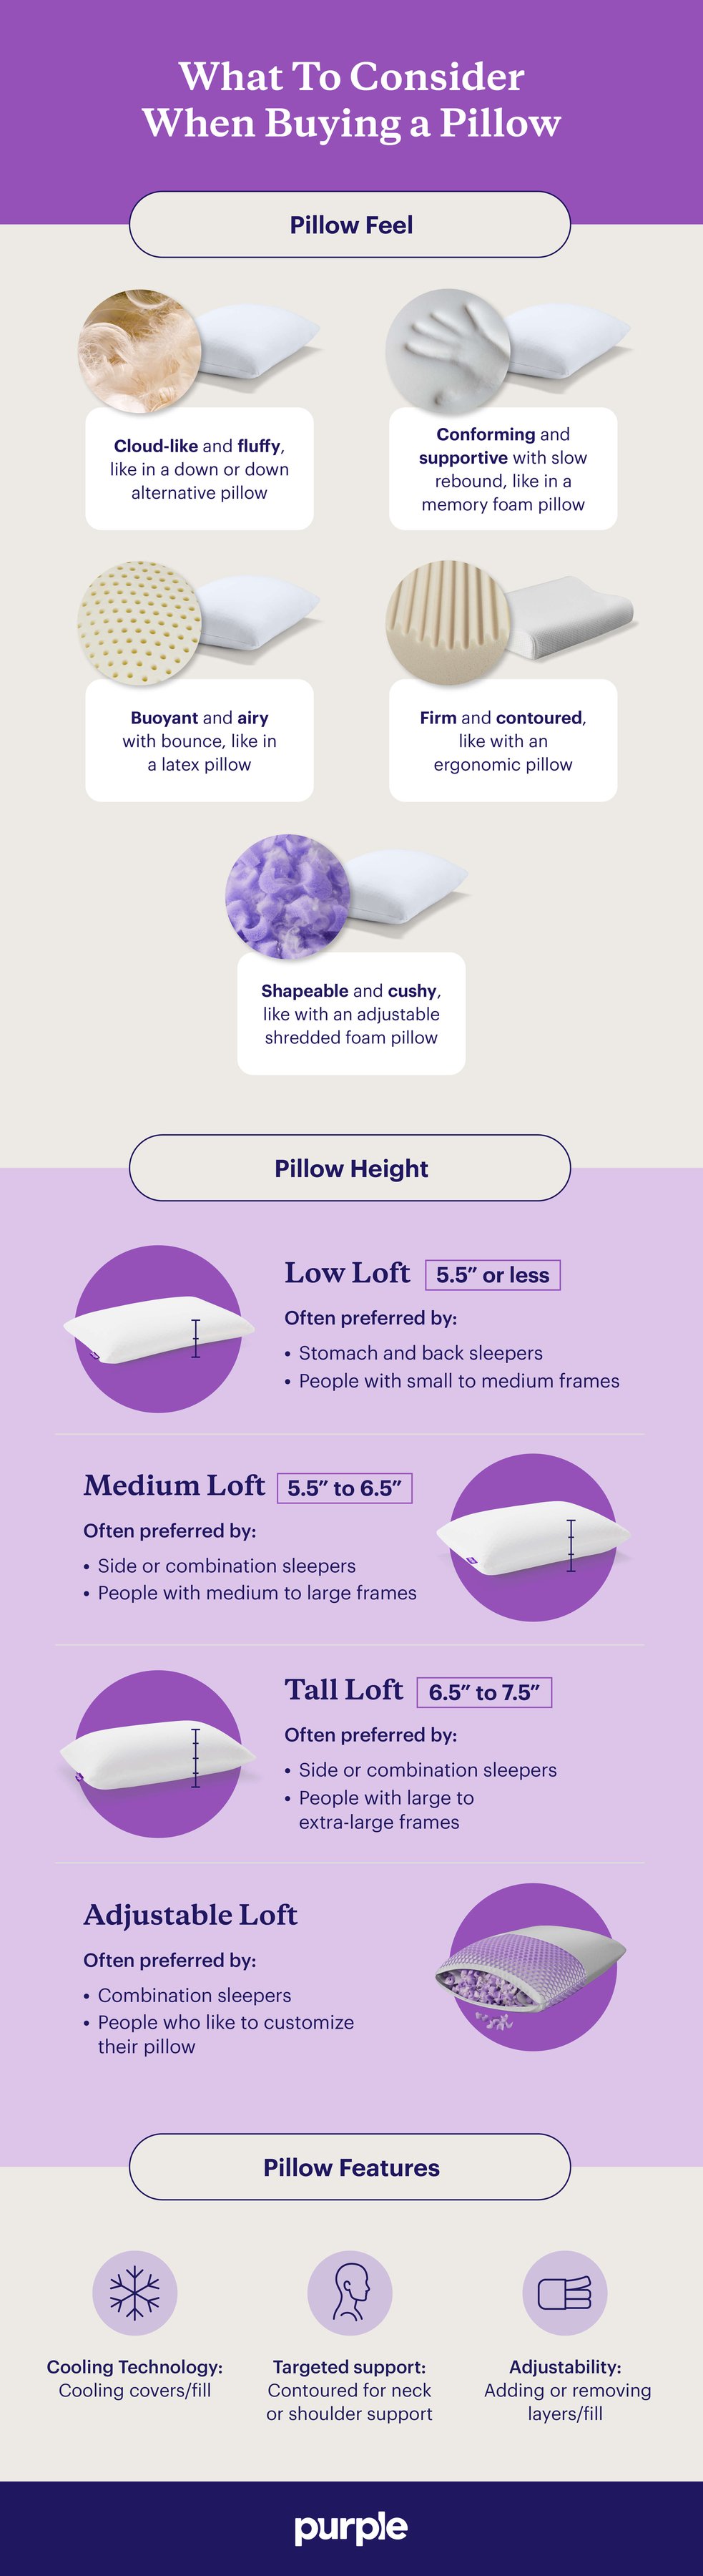 Infographic showing which pillow to pick depending on your preferences.